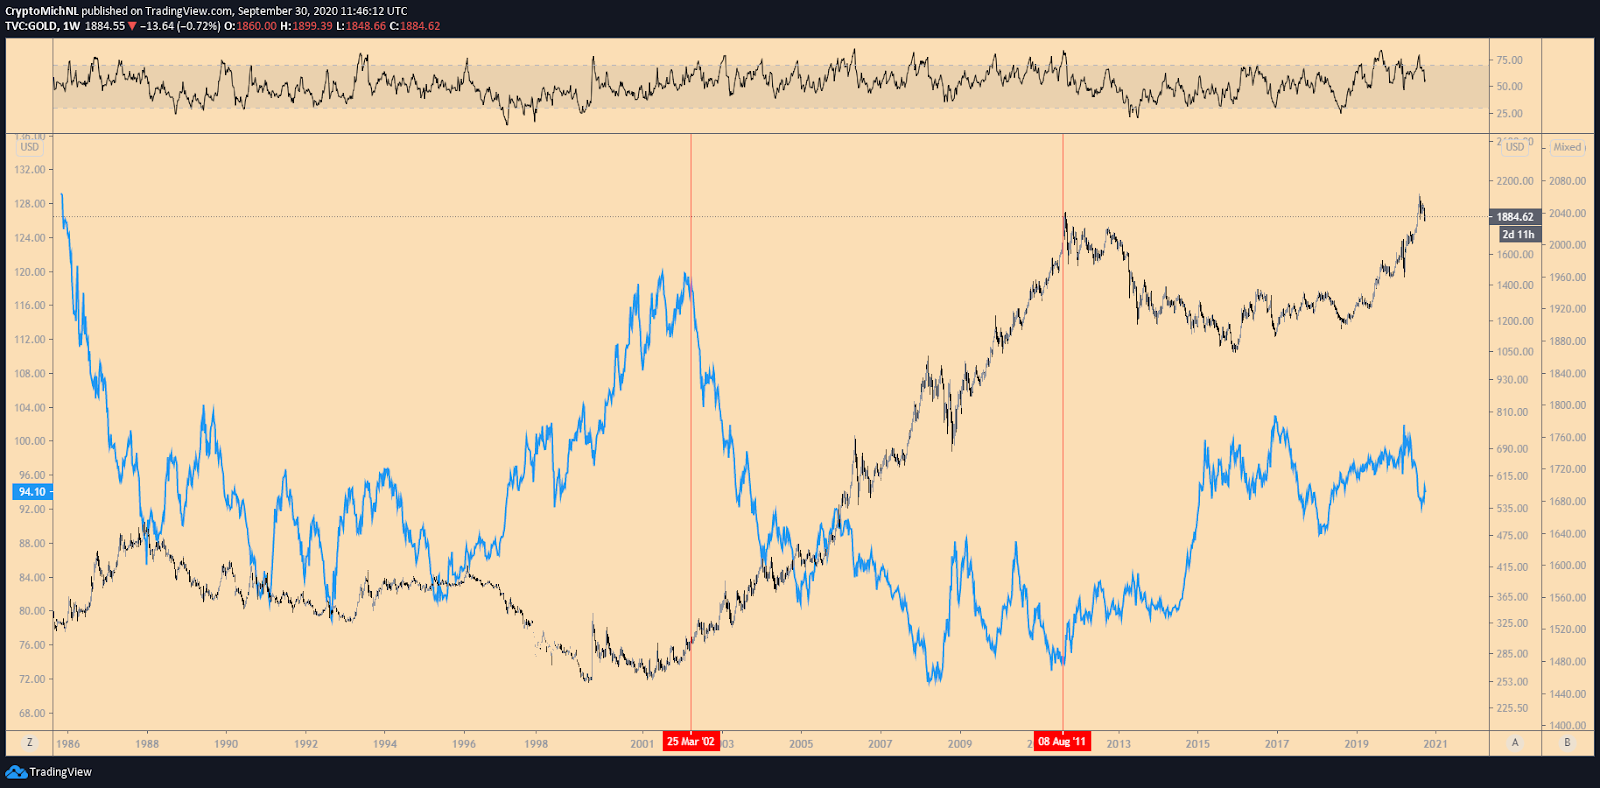 DXY Index vs. Gold 1-week chart. Source: TradingView